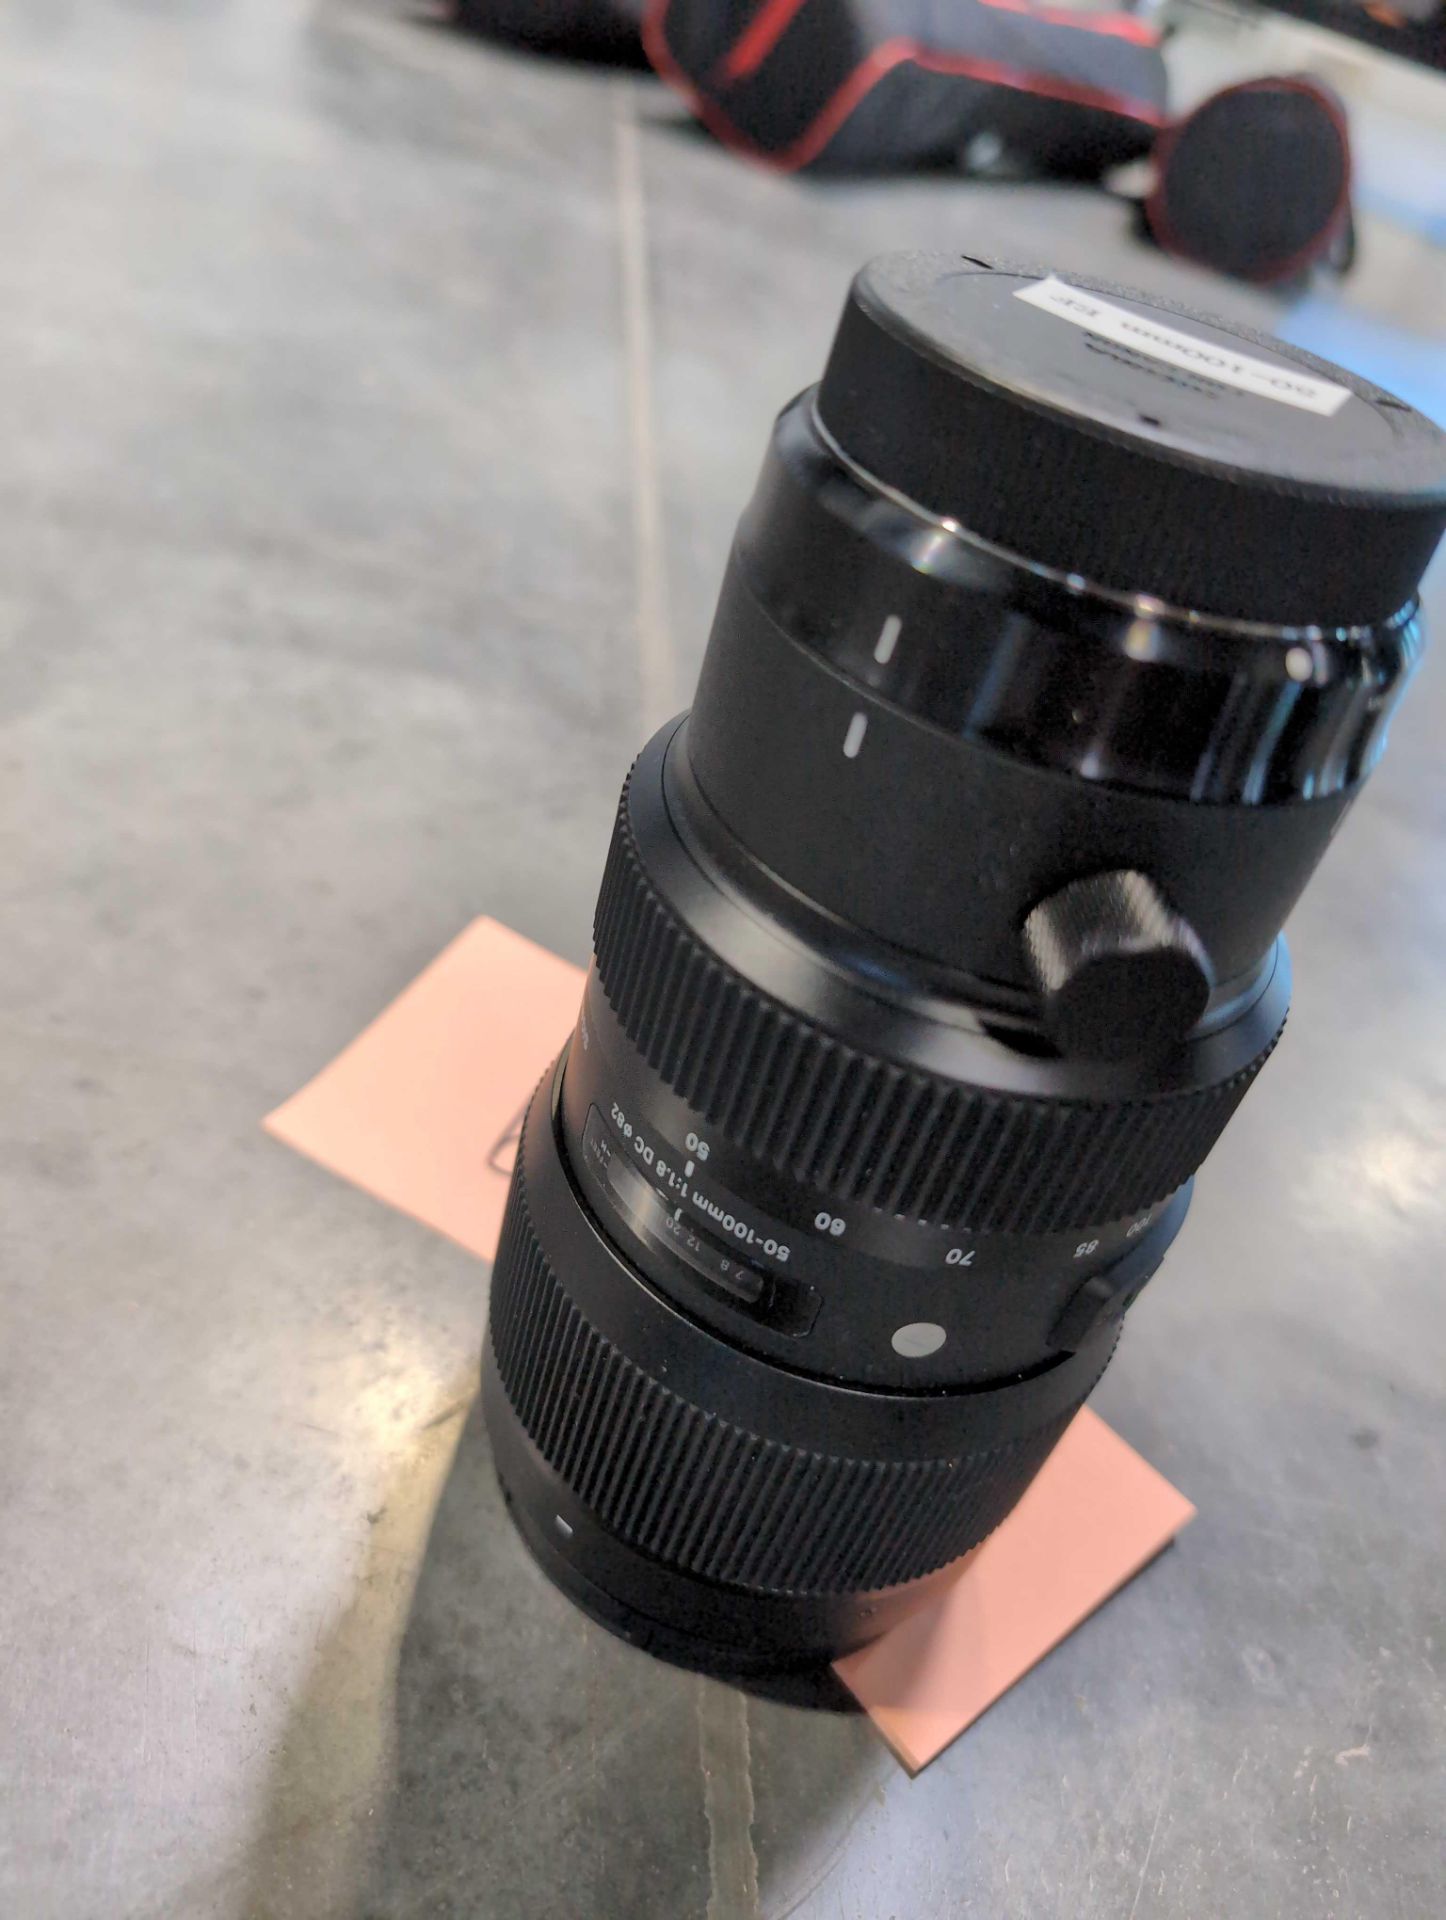 Sigma 50-100mm lens - Image 4 of 4